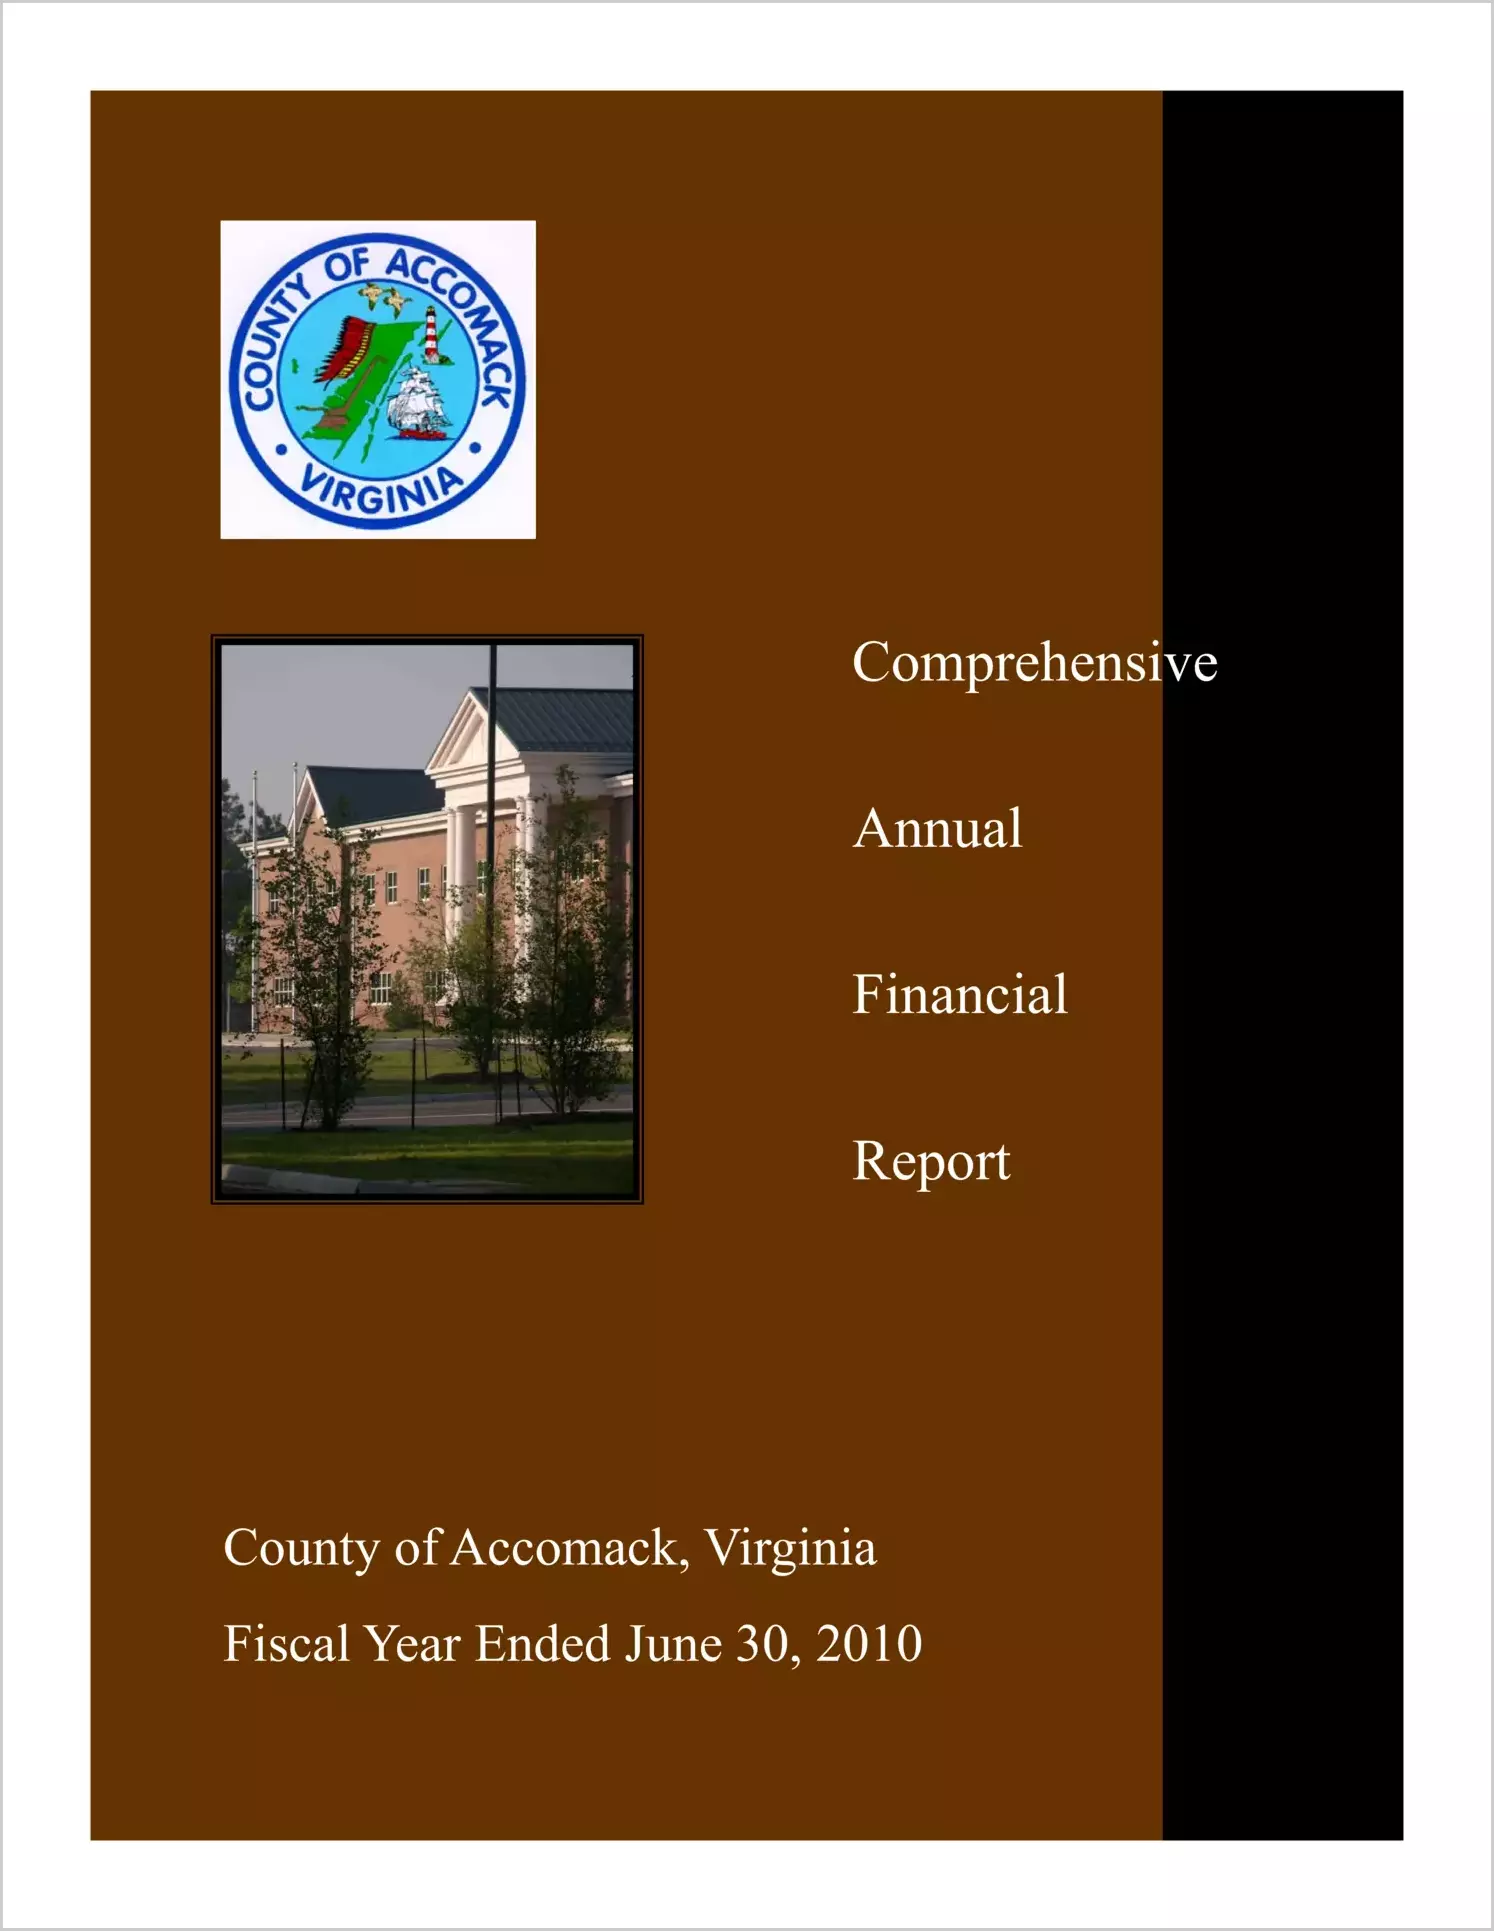 2010 Annual Financial Report for County of Accomack